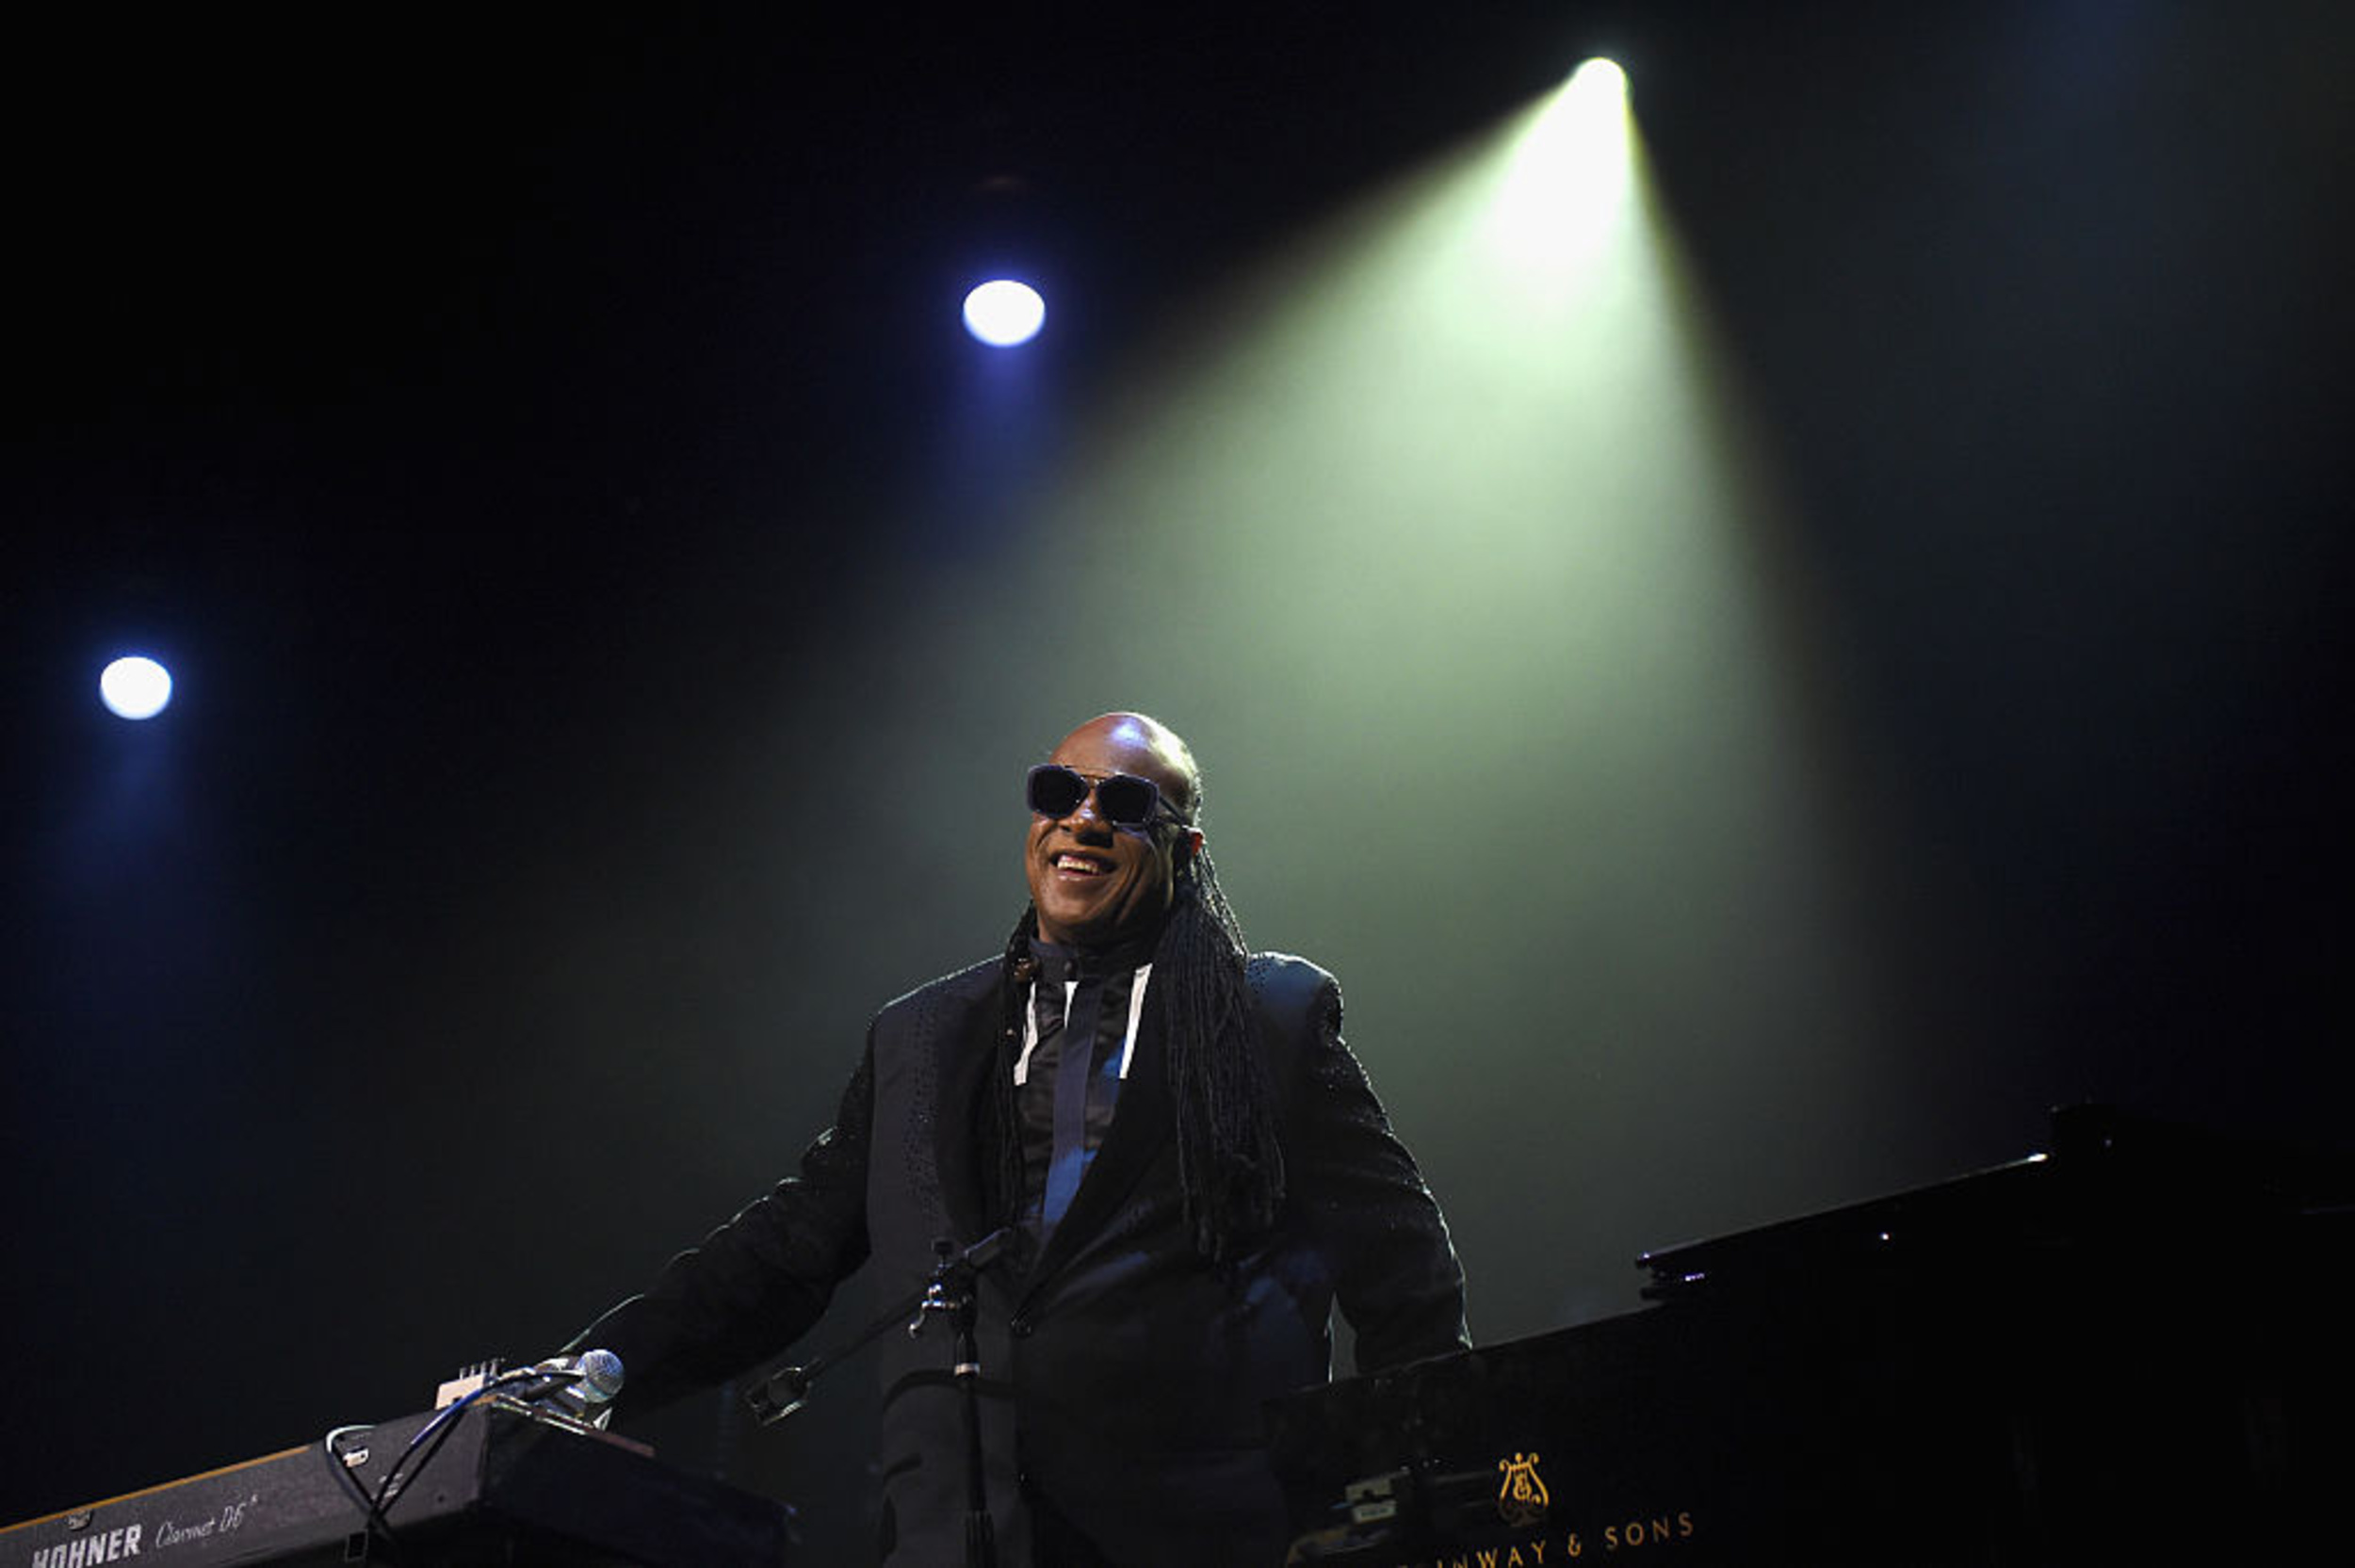 <p>On Stevie Wonder’s 1972 hit song “Superstition,” he expresses how there are many things that people are superstitious of, but he believes people shouldn’t have those beliefs. He mentions everything from ladders falling, to glass breaking, and things of the sort that people think could bring them years of bad luck. The song became a No. 1 hit on the Billboard Hot 100. </p><p><a href='https://www.msn.com/en-us/community/channel/vid-cj9pqbr0vn9in2b6ddcd8sfgpfq6x6utp44fssrv6mc2gtybw0us'>Follow us on MSN to see more of our exclusive entertainment content.</a></p>